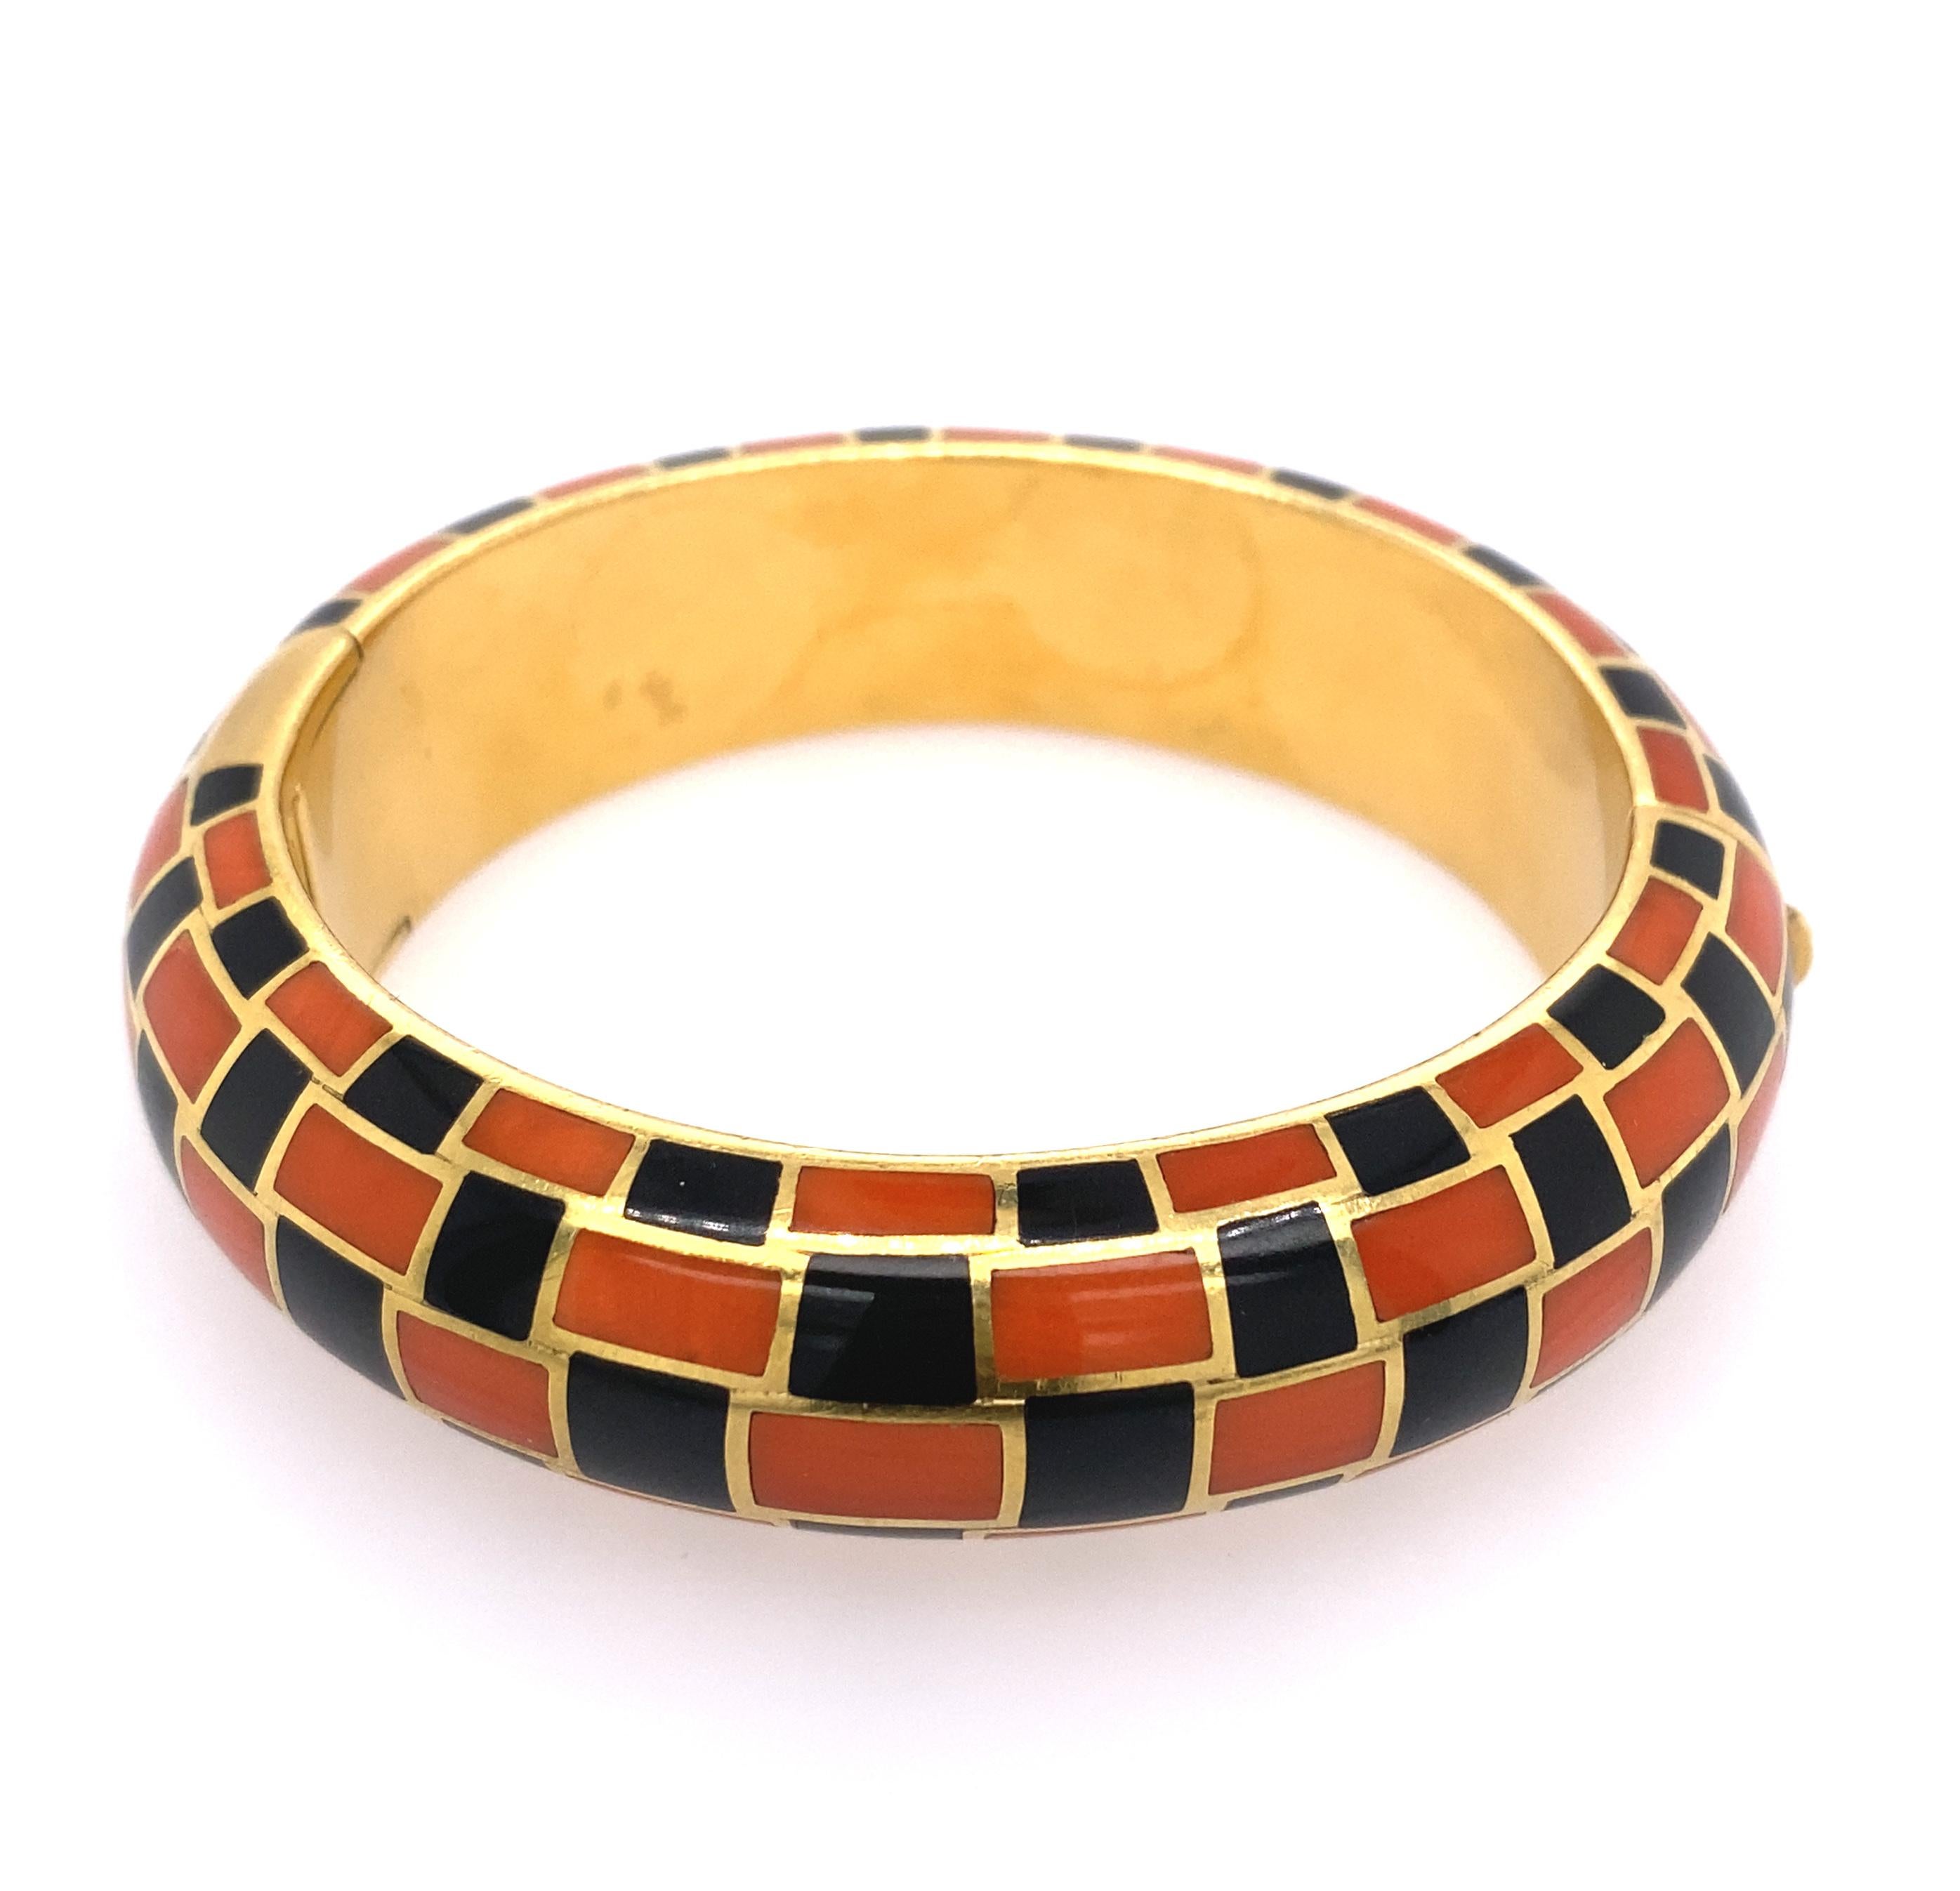 18k gold, coral and black jade bangle, signed Tiffany & Co. 
Total weight 37.0 dwt. Measurement of bracelet wrist 6.50 inches. 